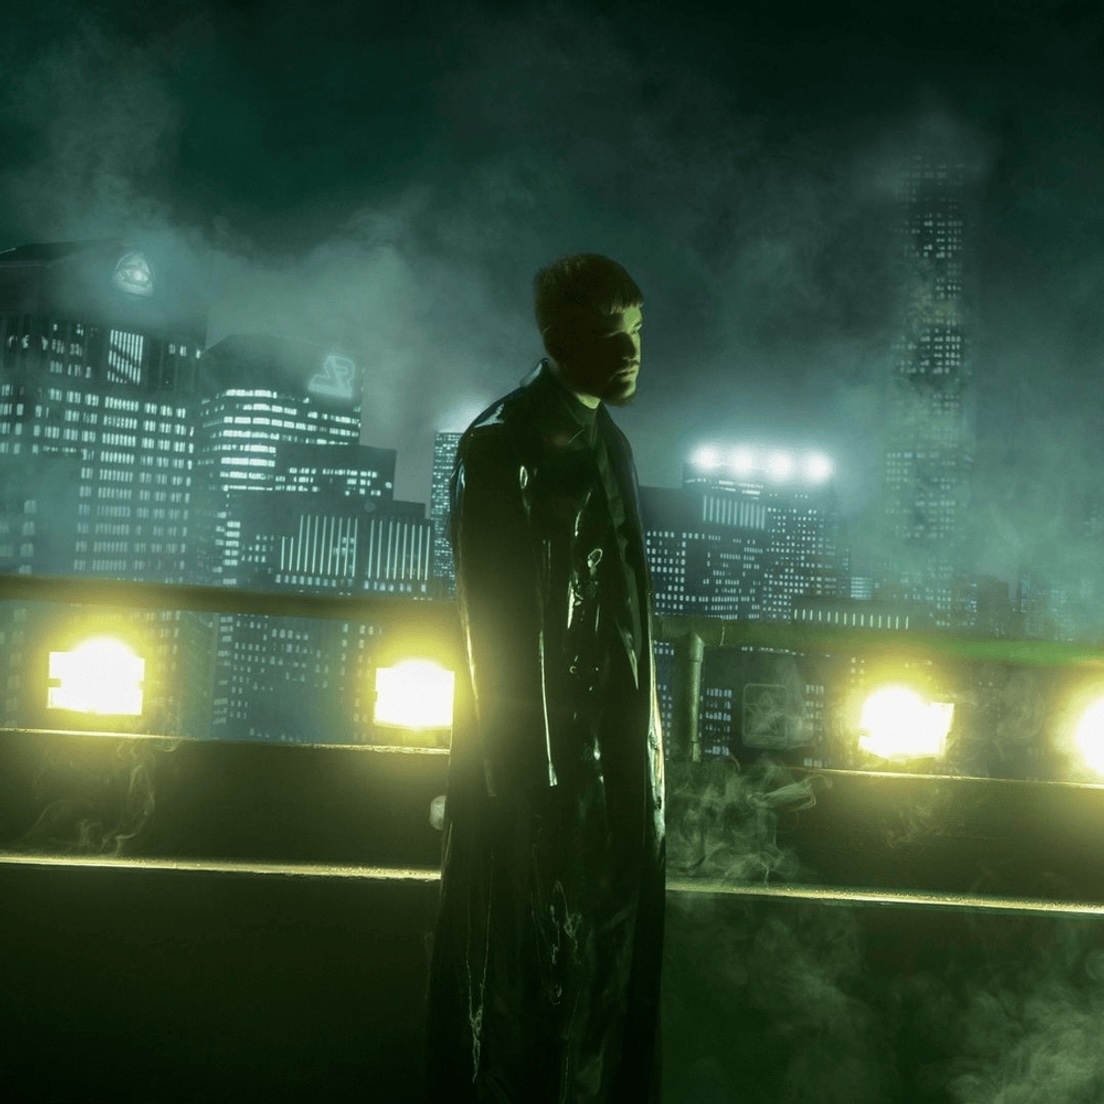 Person in dark trench coat stands on a rooftop with a misty city skyline and illuminated buildings in the background